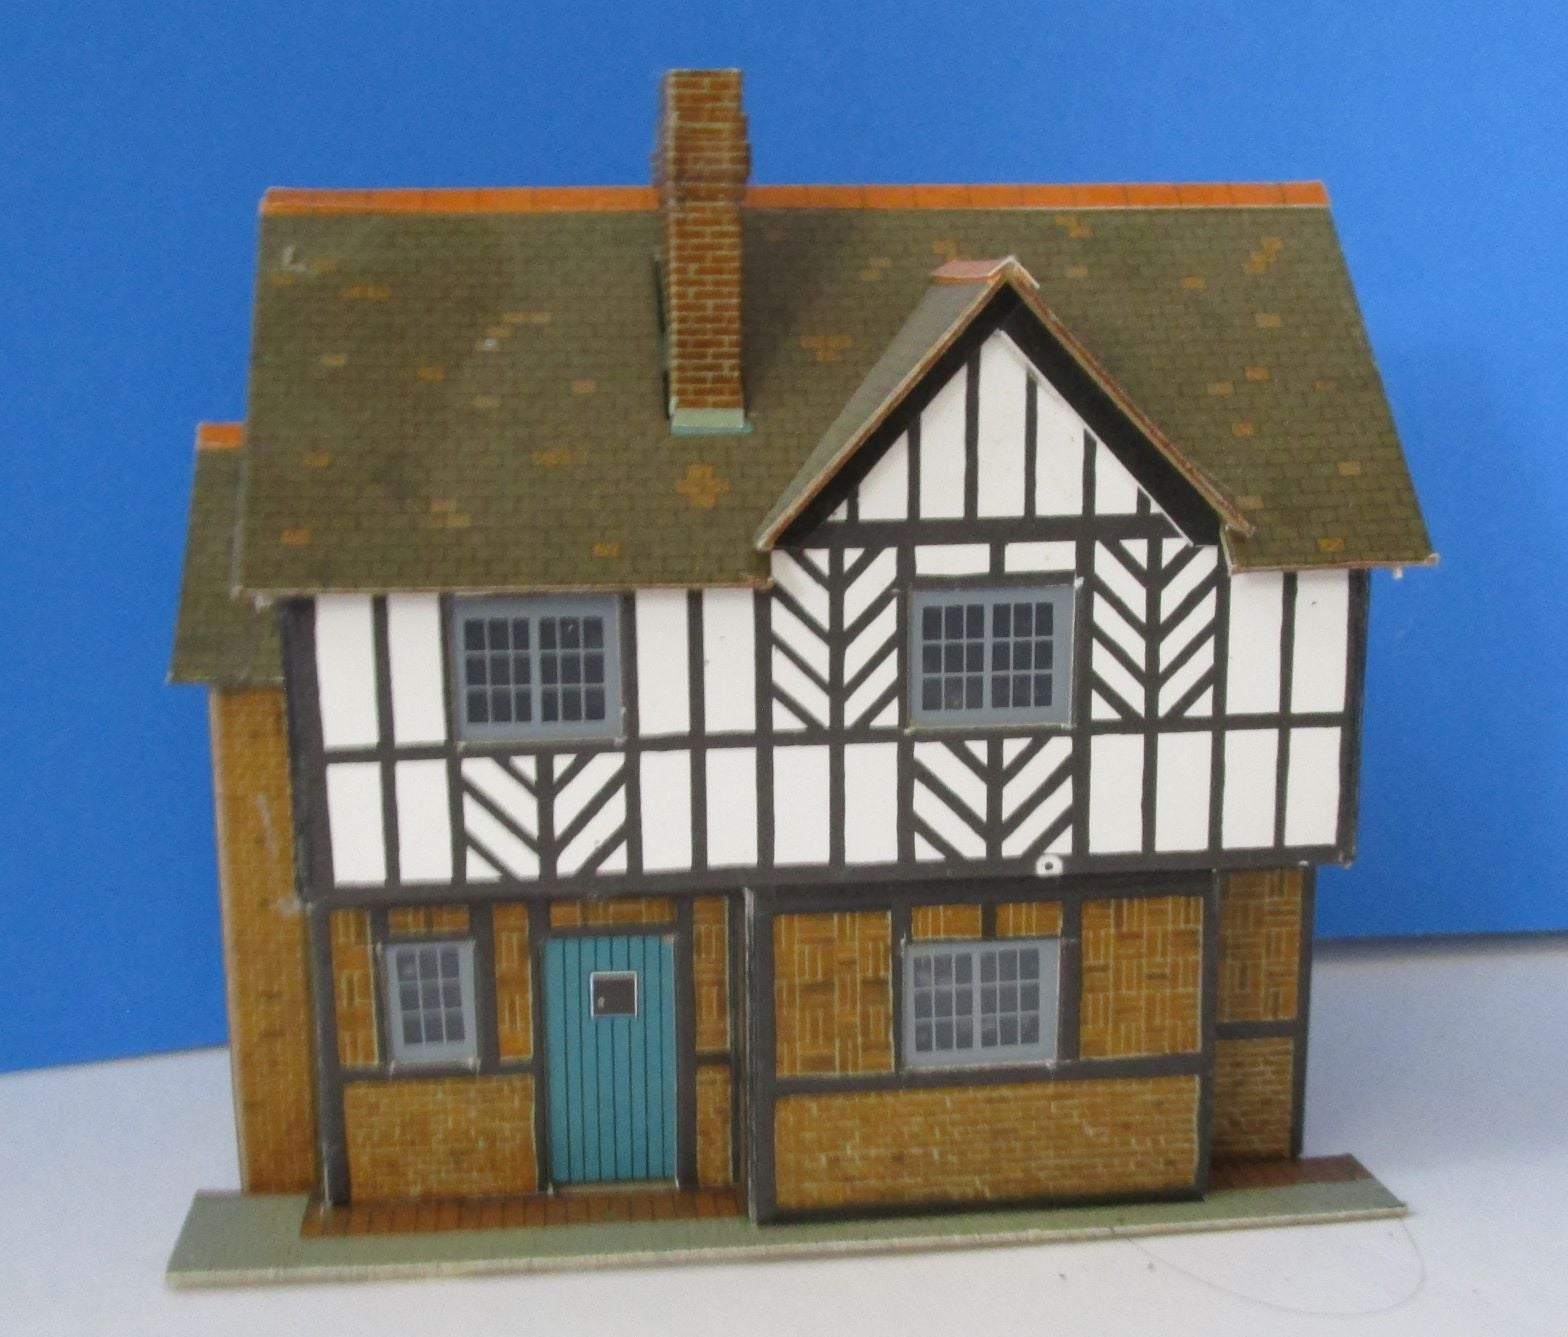 UB229 Brick and timber framed house  - built from a Superquick kit